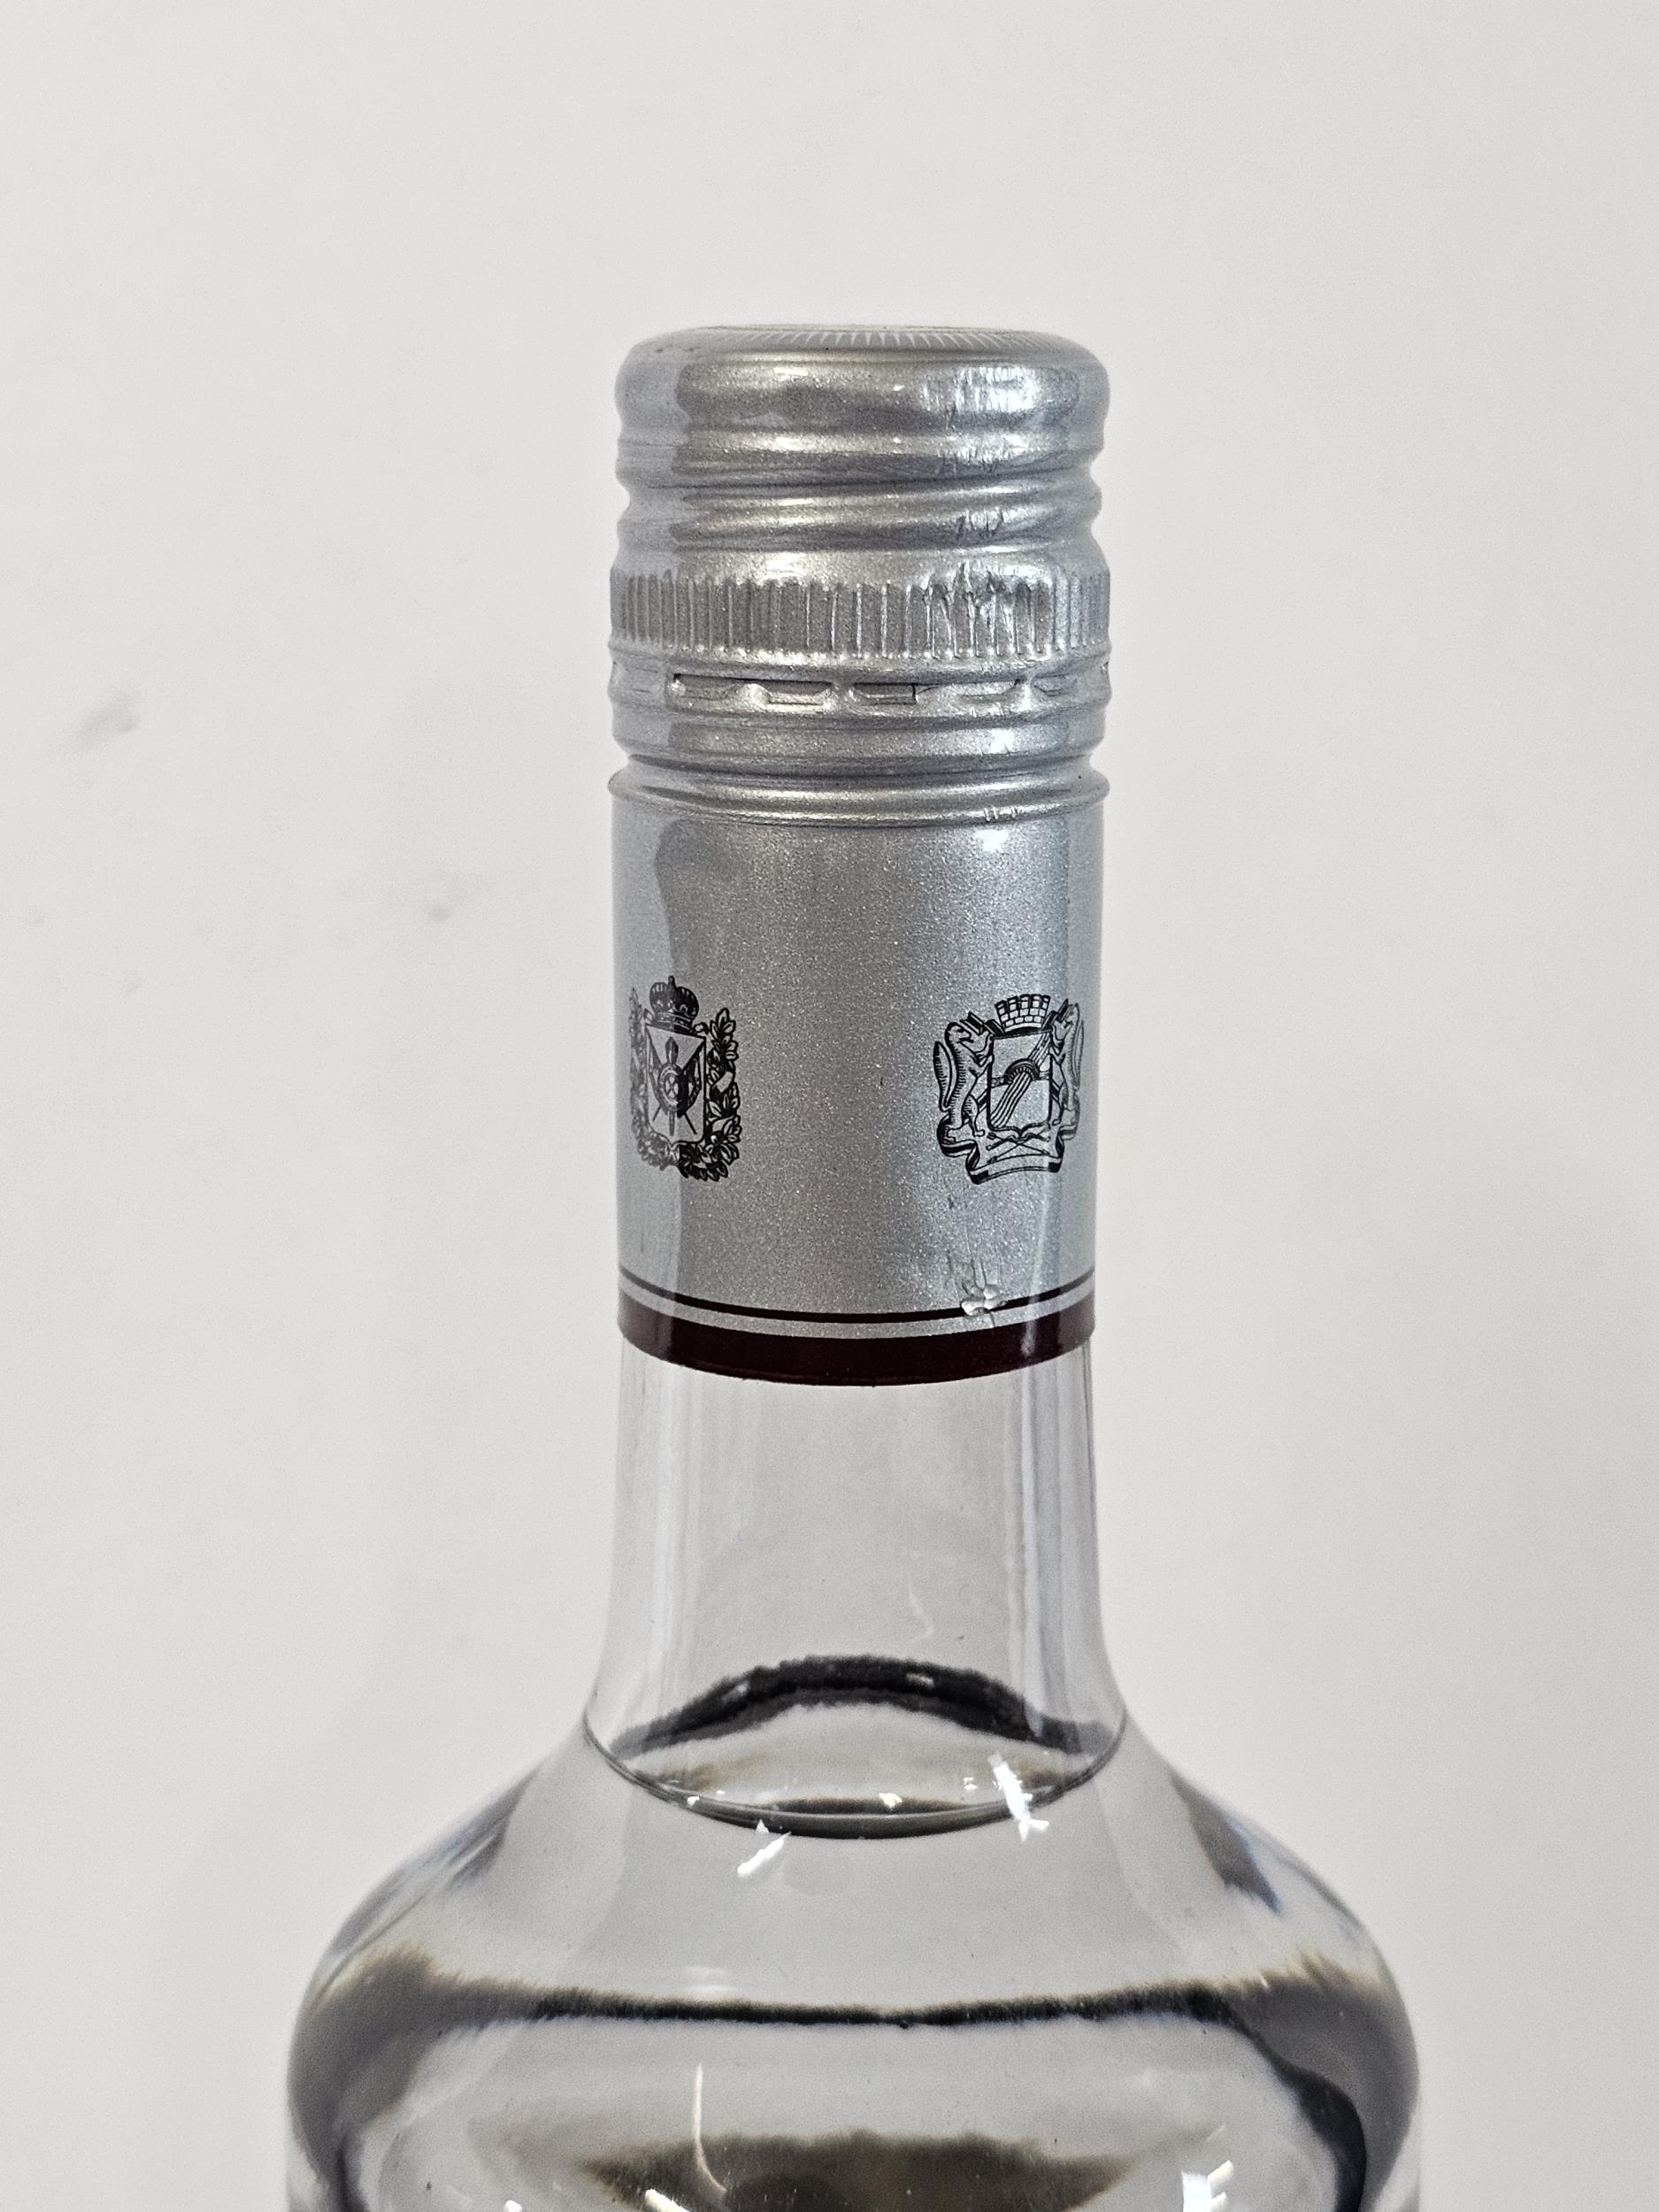 A bottle of Blavod Black Vodka, UK, together with a bottle of Chinggis Khan Vodka, Mongolia, and a - Bild 6 aus 9